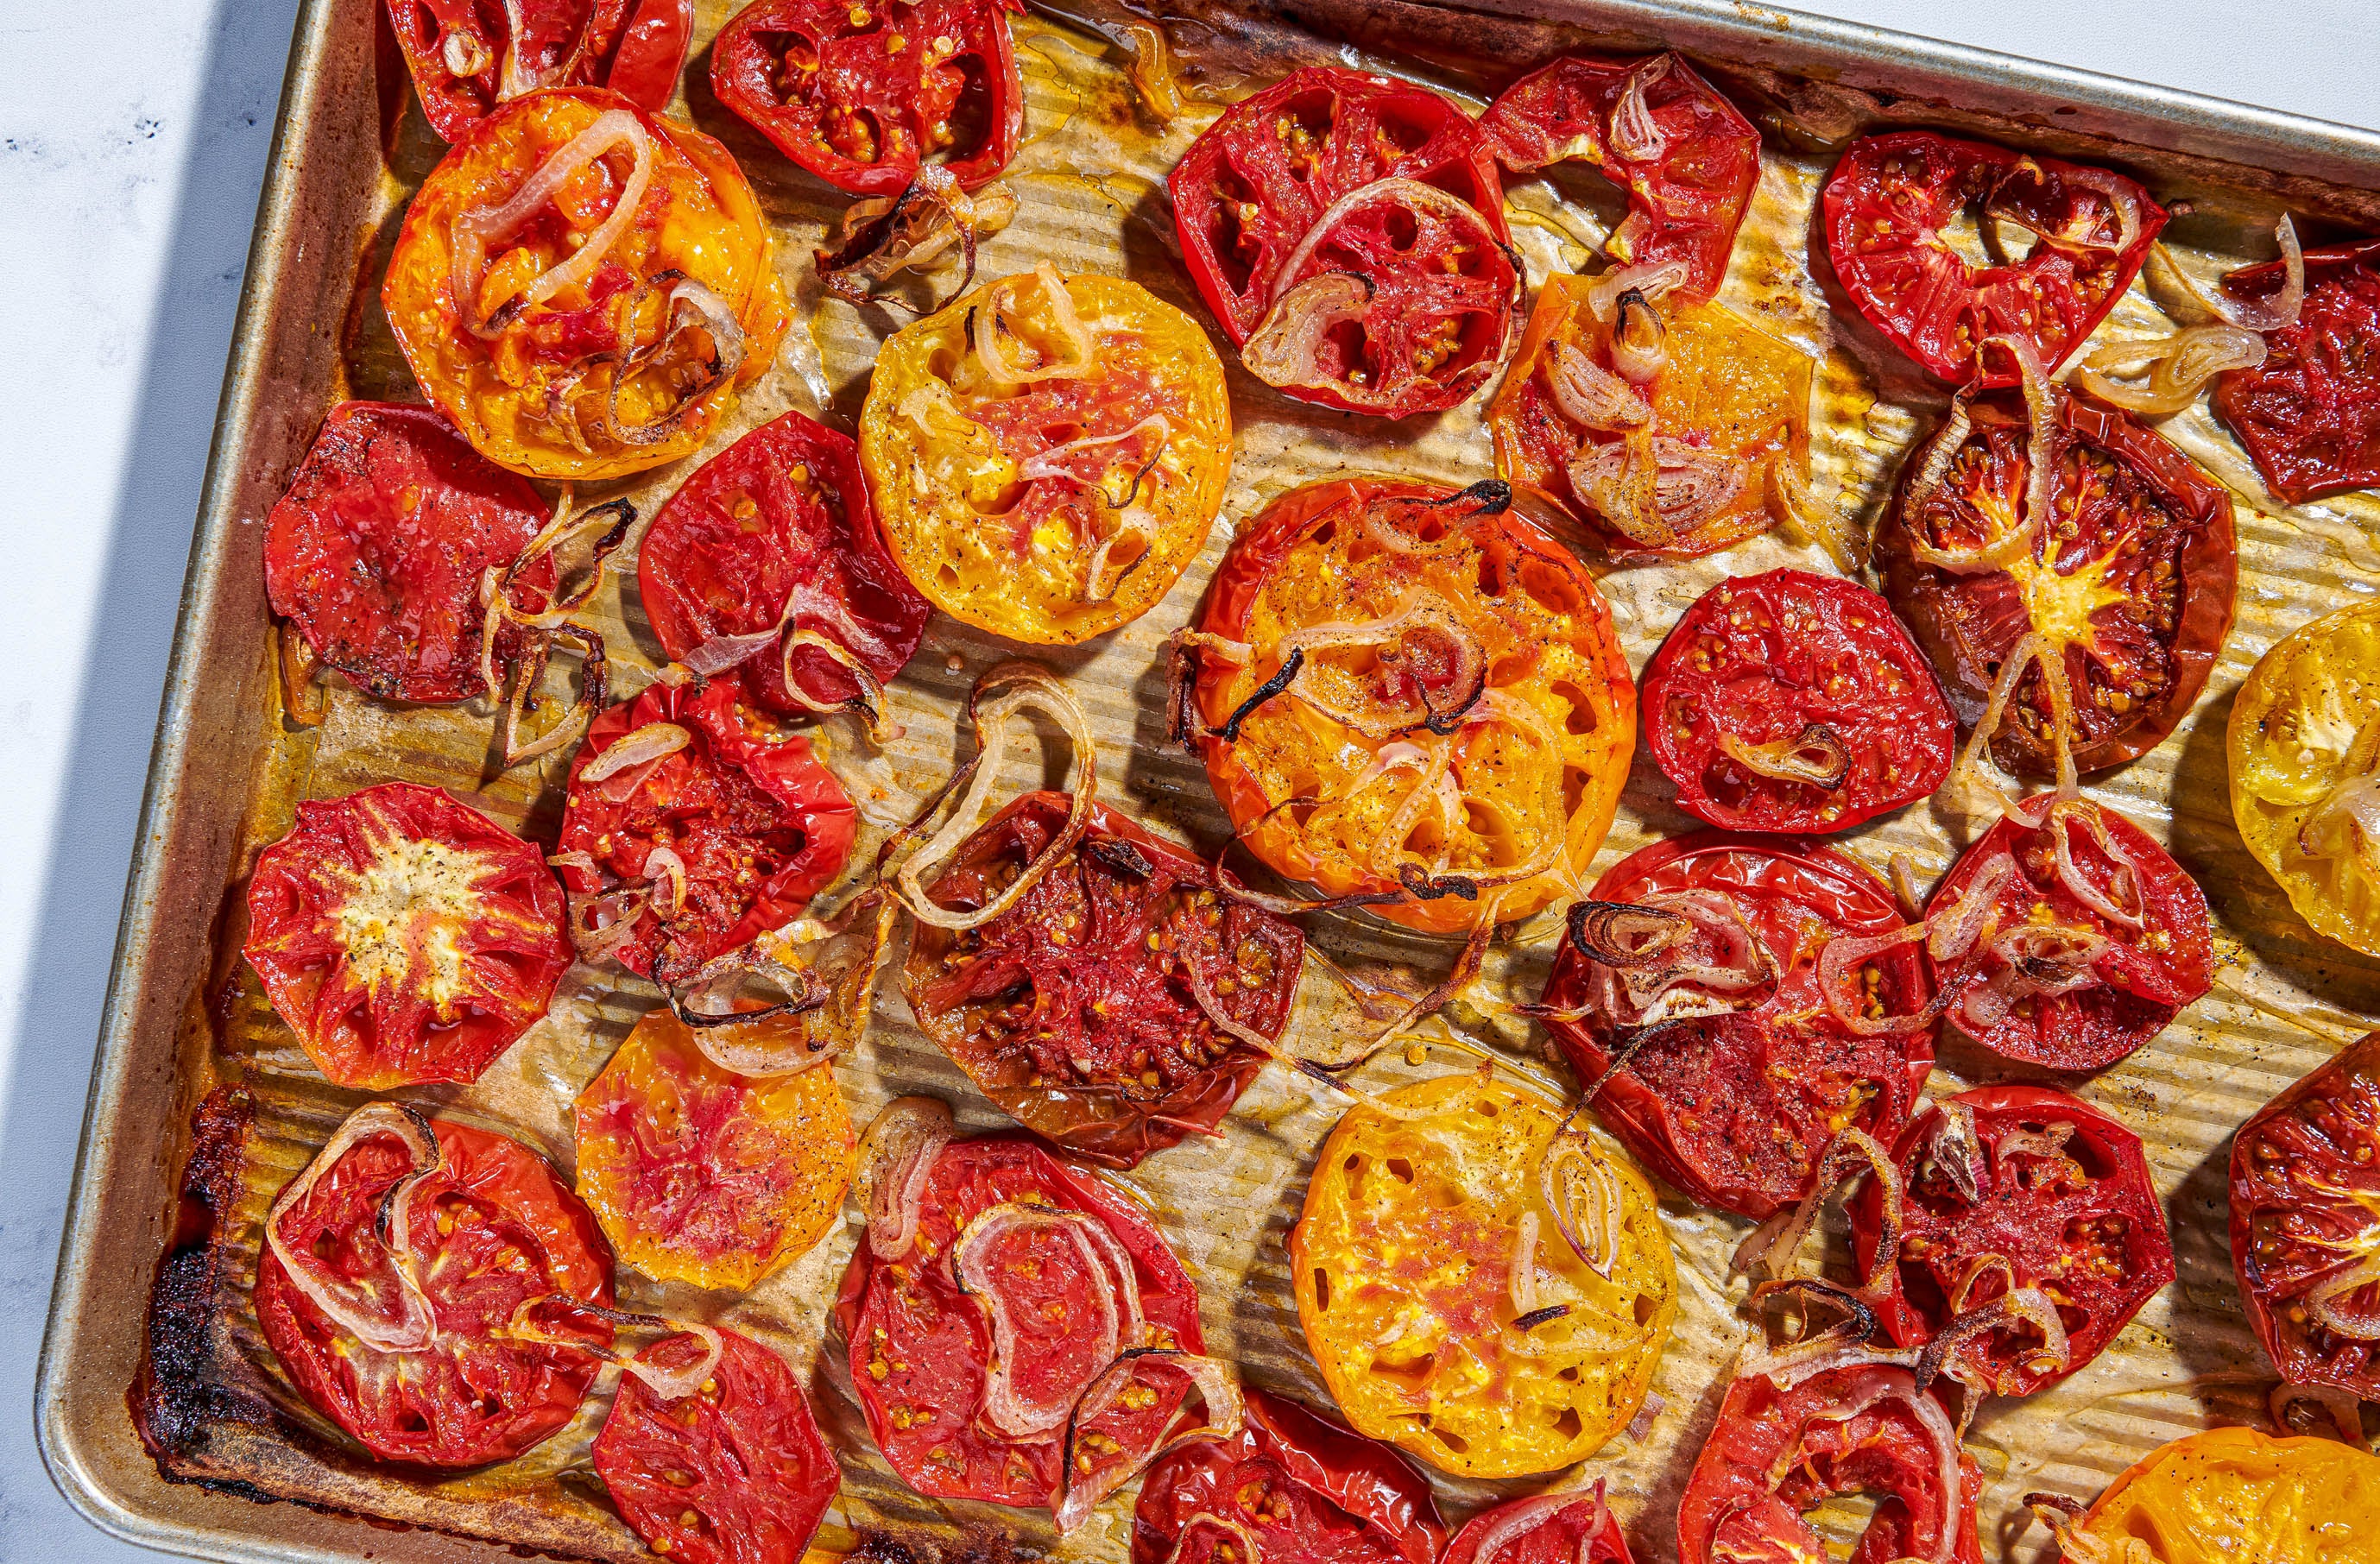 Before constructing the pie, you need to dehydrate the tomatoes a little